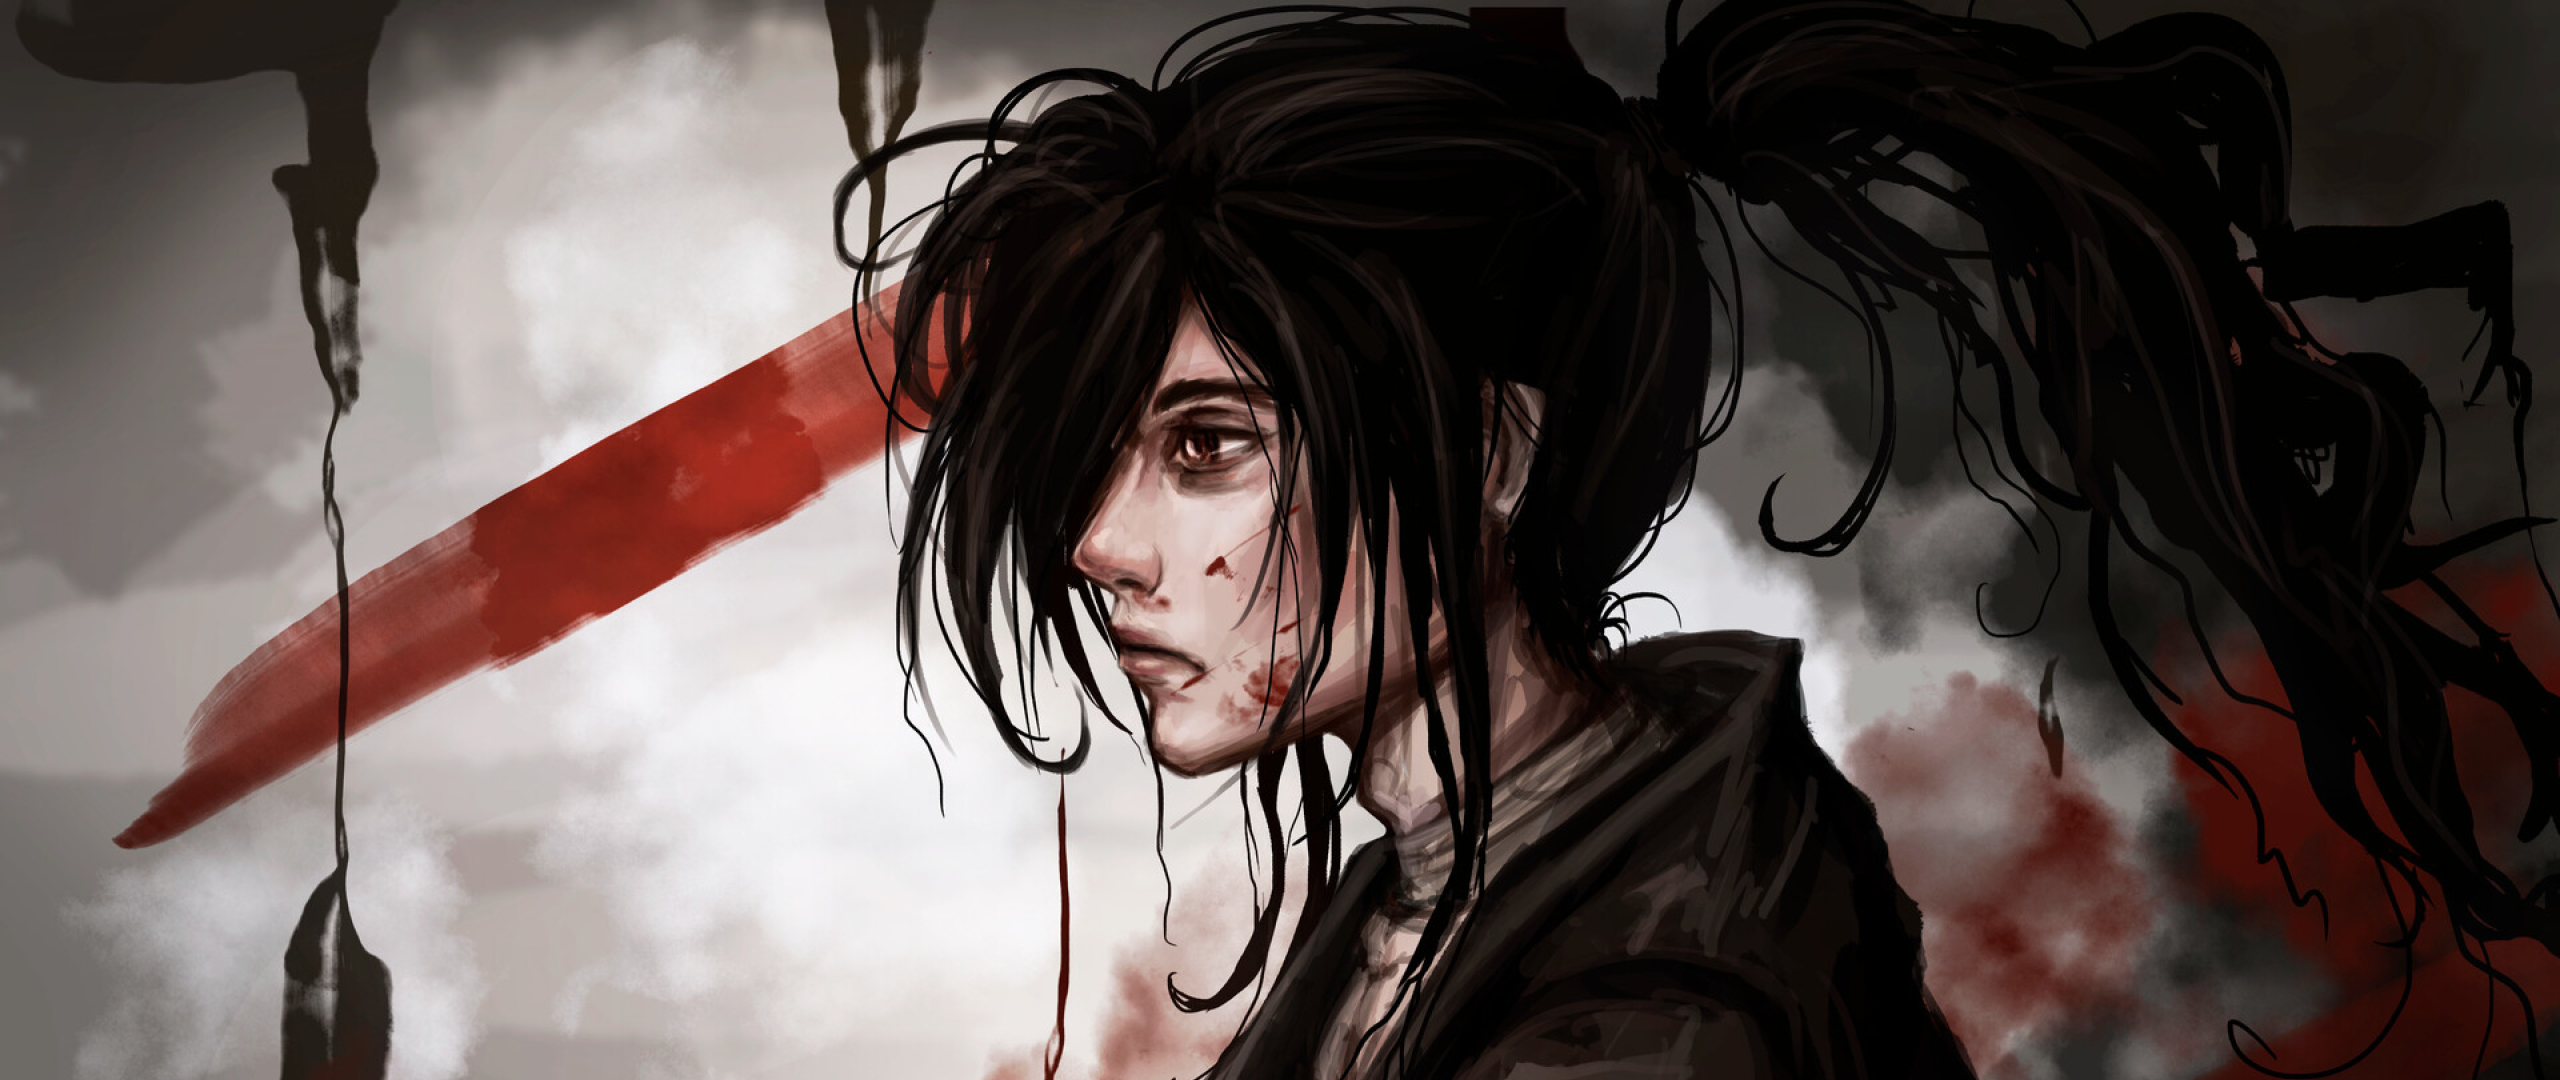 2560x1080 Hyakkimaru In Dororo Anime 2560x1080 Resolution Wallpaper Hd Anime 4k Wallpapers Images Photos And Background Wallpapers Den